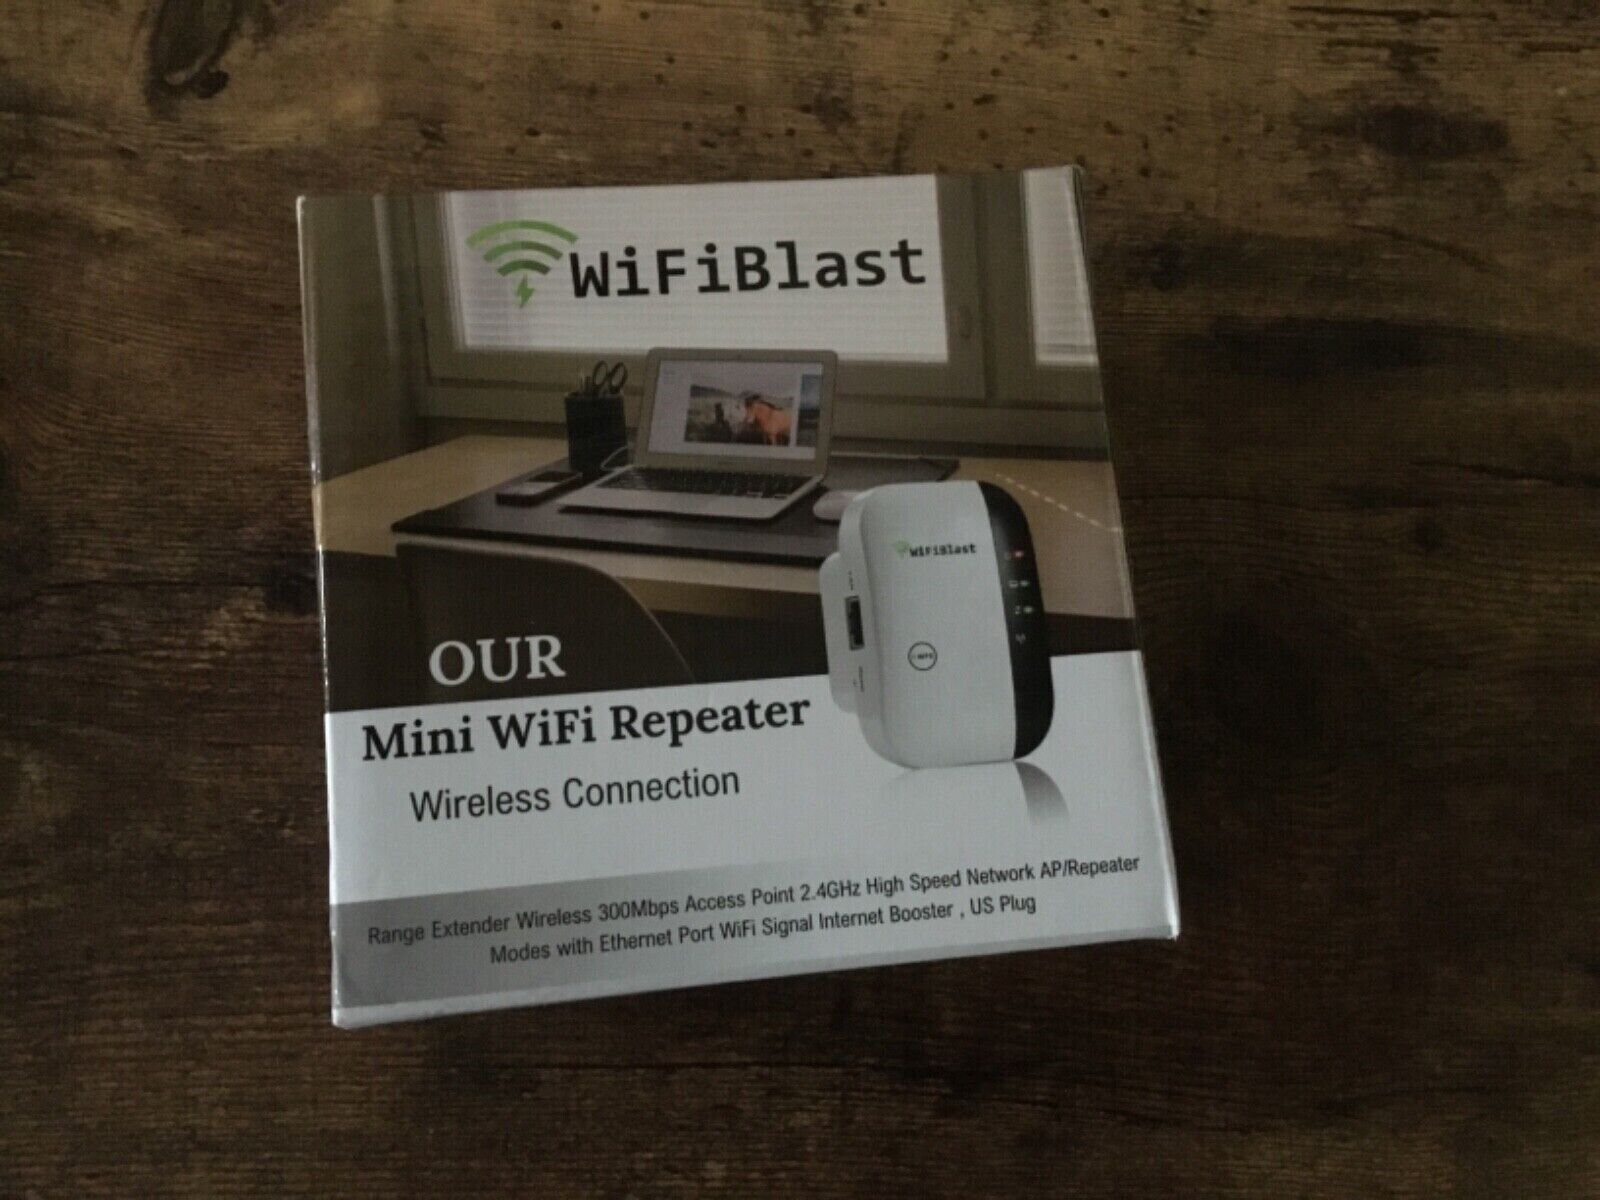 OUR MINI WIFI REPEATER/WIFI BLAST 300MBPS ACCESS POINT 2.4GHZ